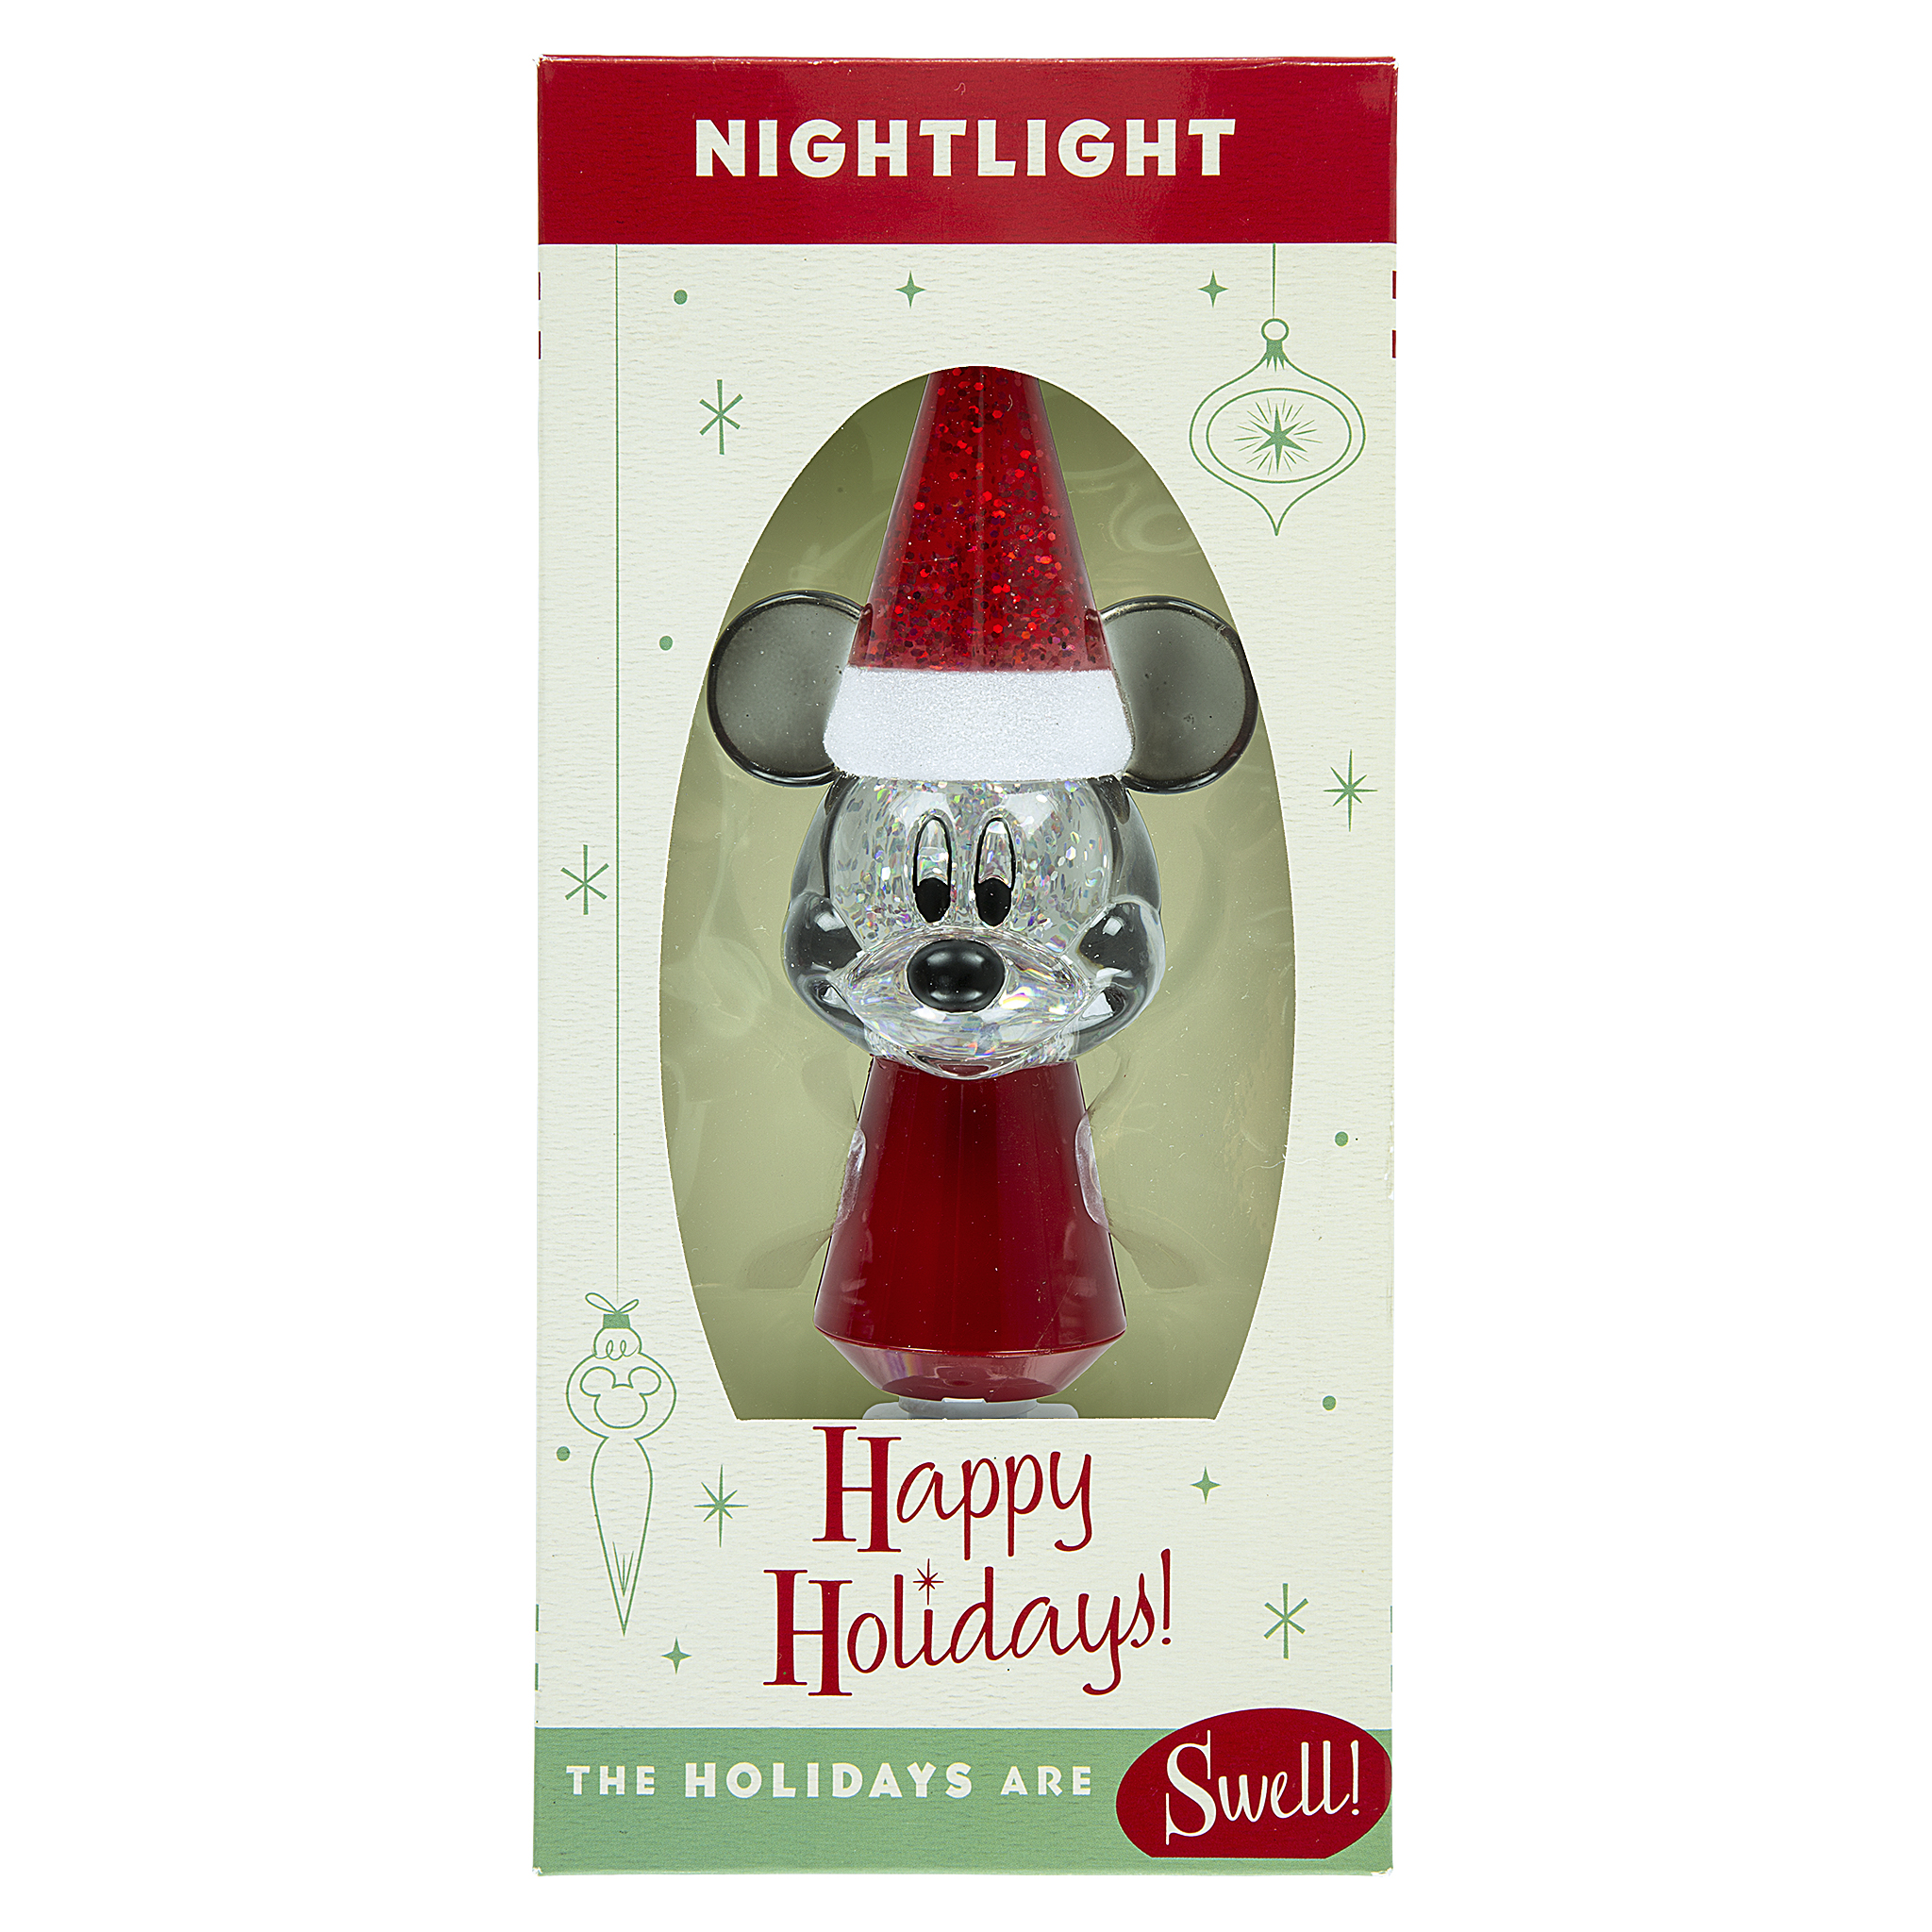  Recalled Happy Holidays! Mickey Mouse Nightlight in packaging